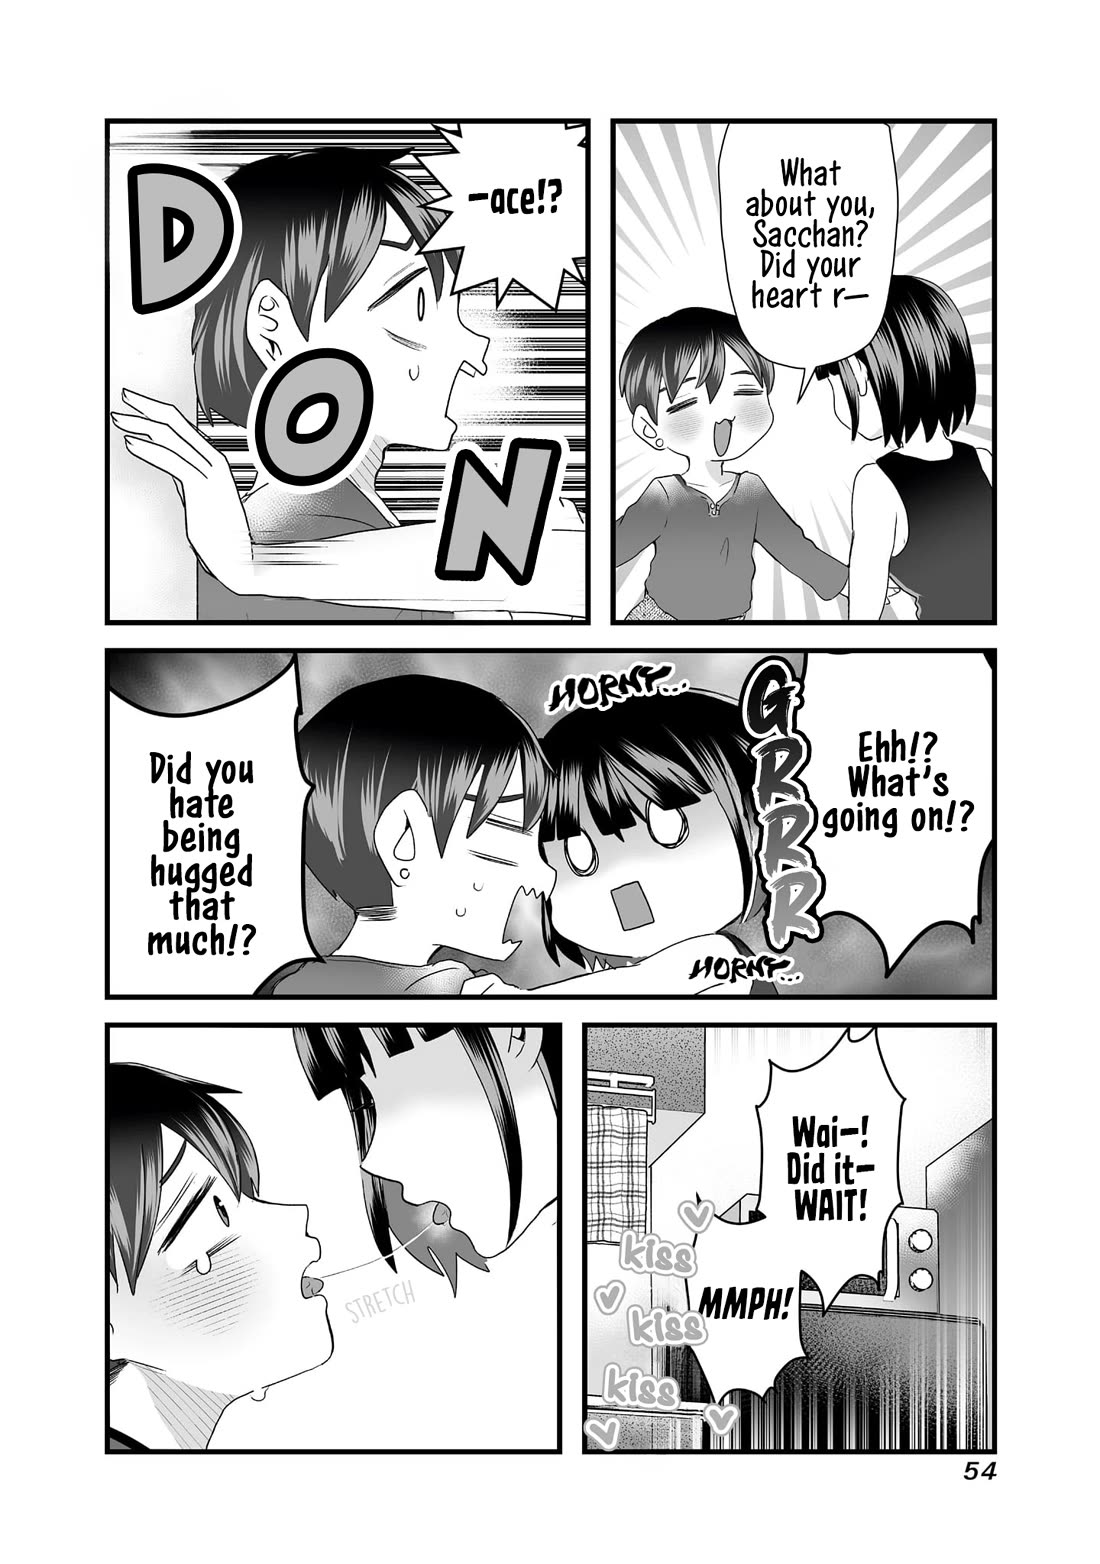 Sacchan and Ken-chan Are Going at it Again - chapter 6 - #6